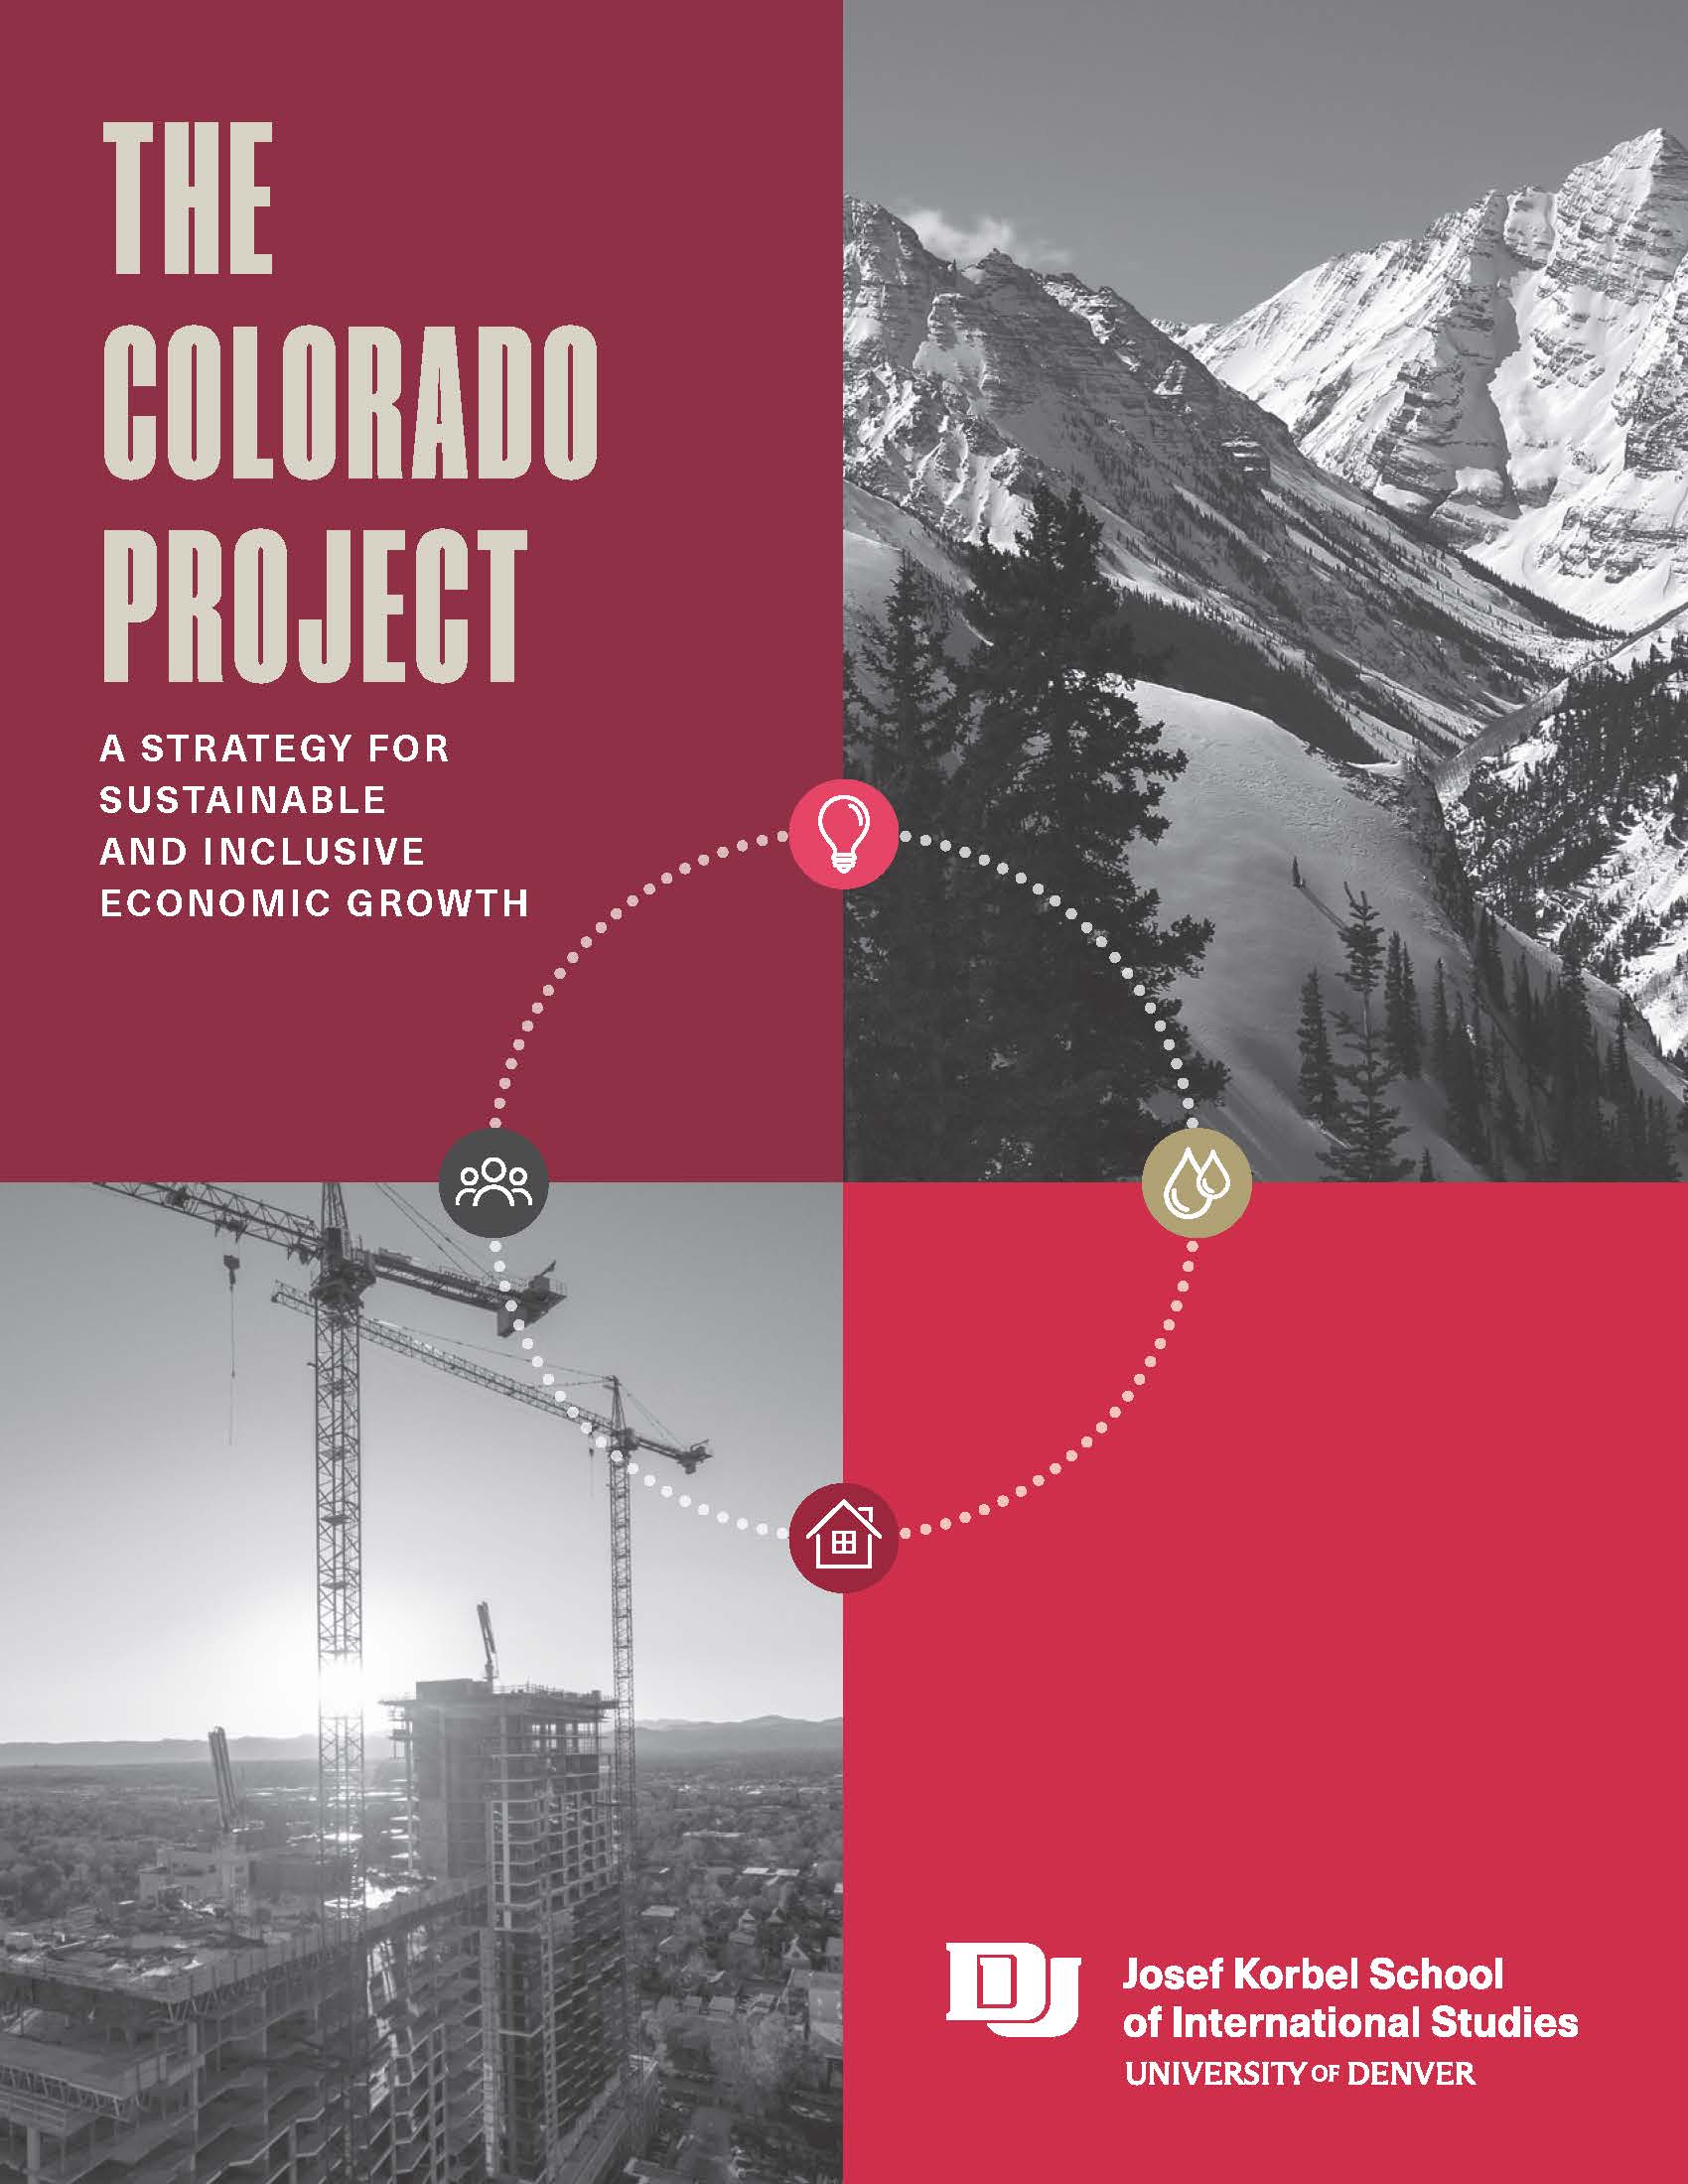 The Colorado Project: A Strategy for Sustainable and Inclusive Economic Growth